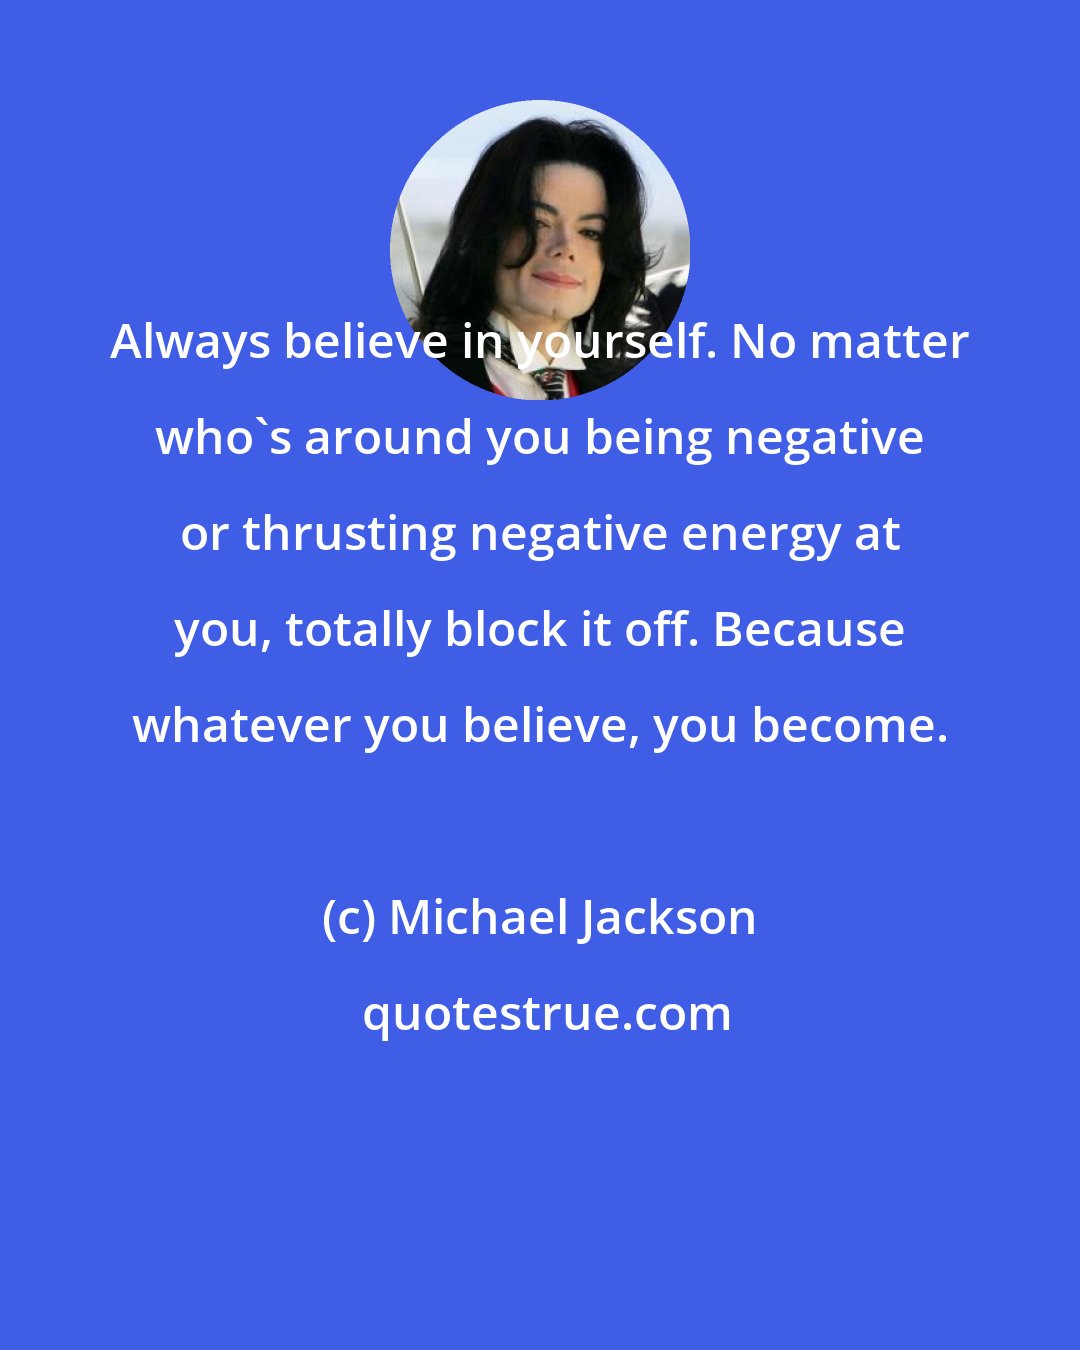 Michael Jackson: Always believe in yourself. No matter who's around you being negative or thrusting negative energy at you, totally block it off. Because whatever you believe, you become.